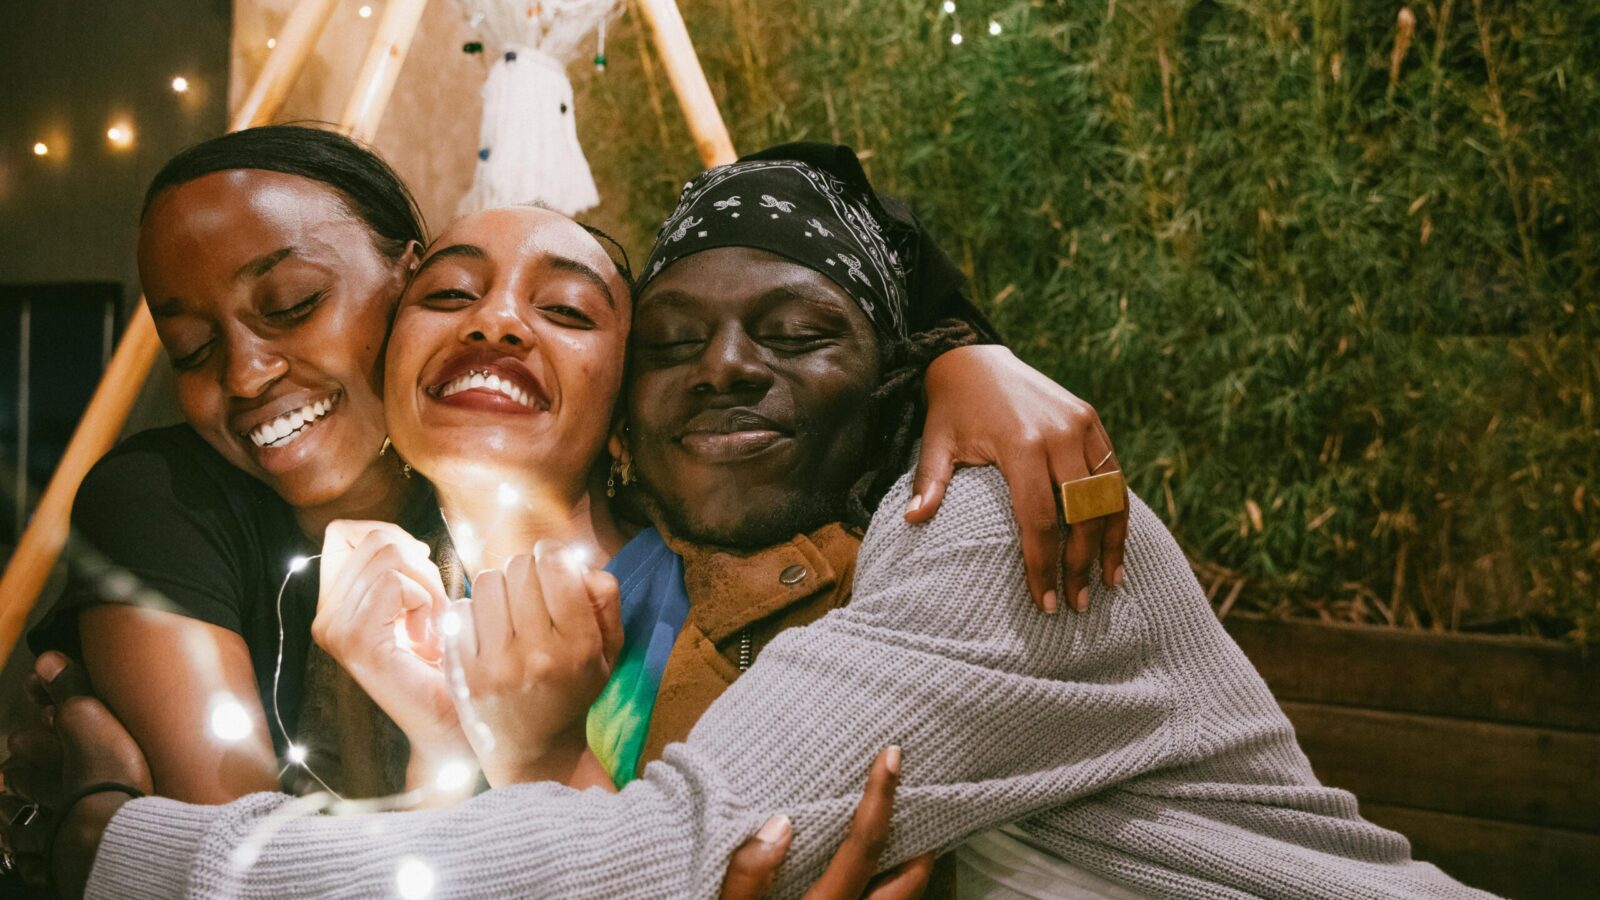 Three black friends hugging each other with smiles on their faces, outdoors under twinkling lights